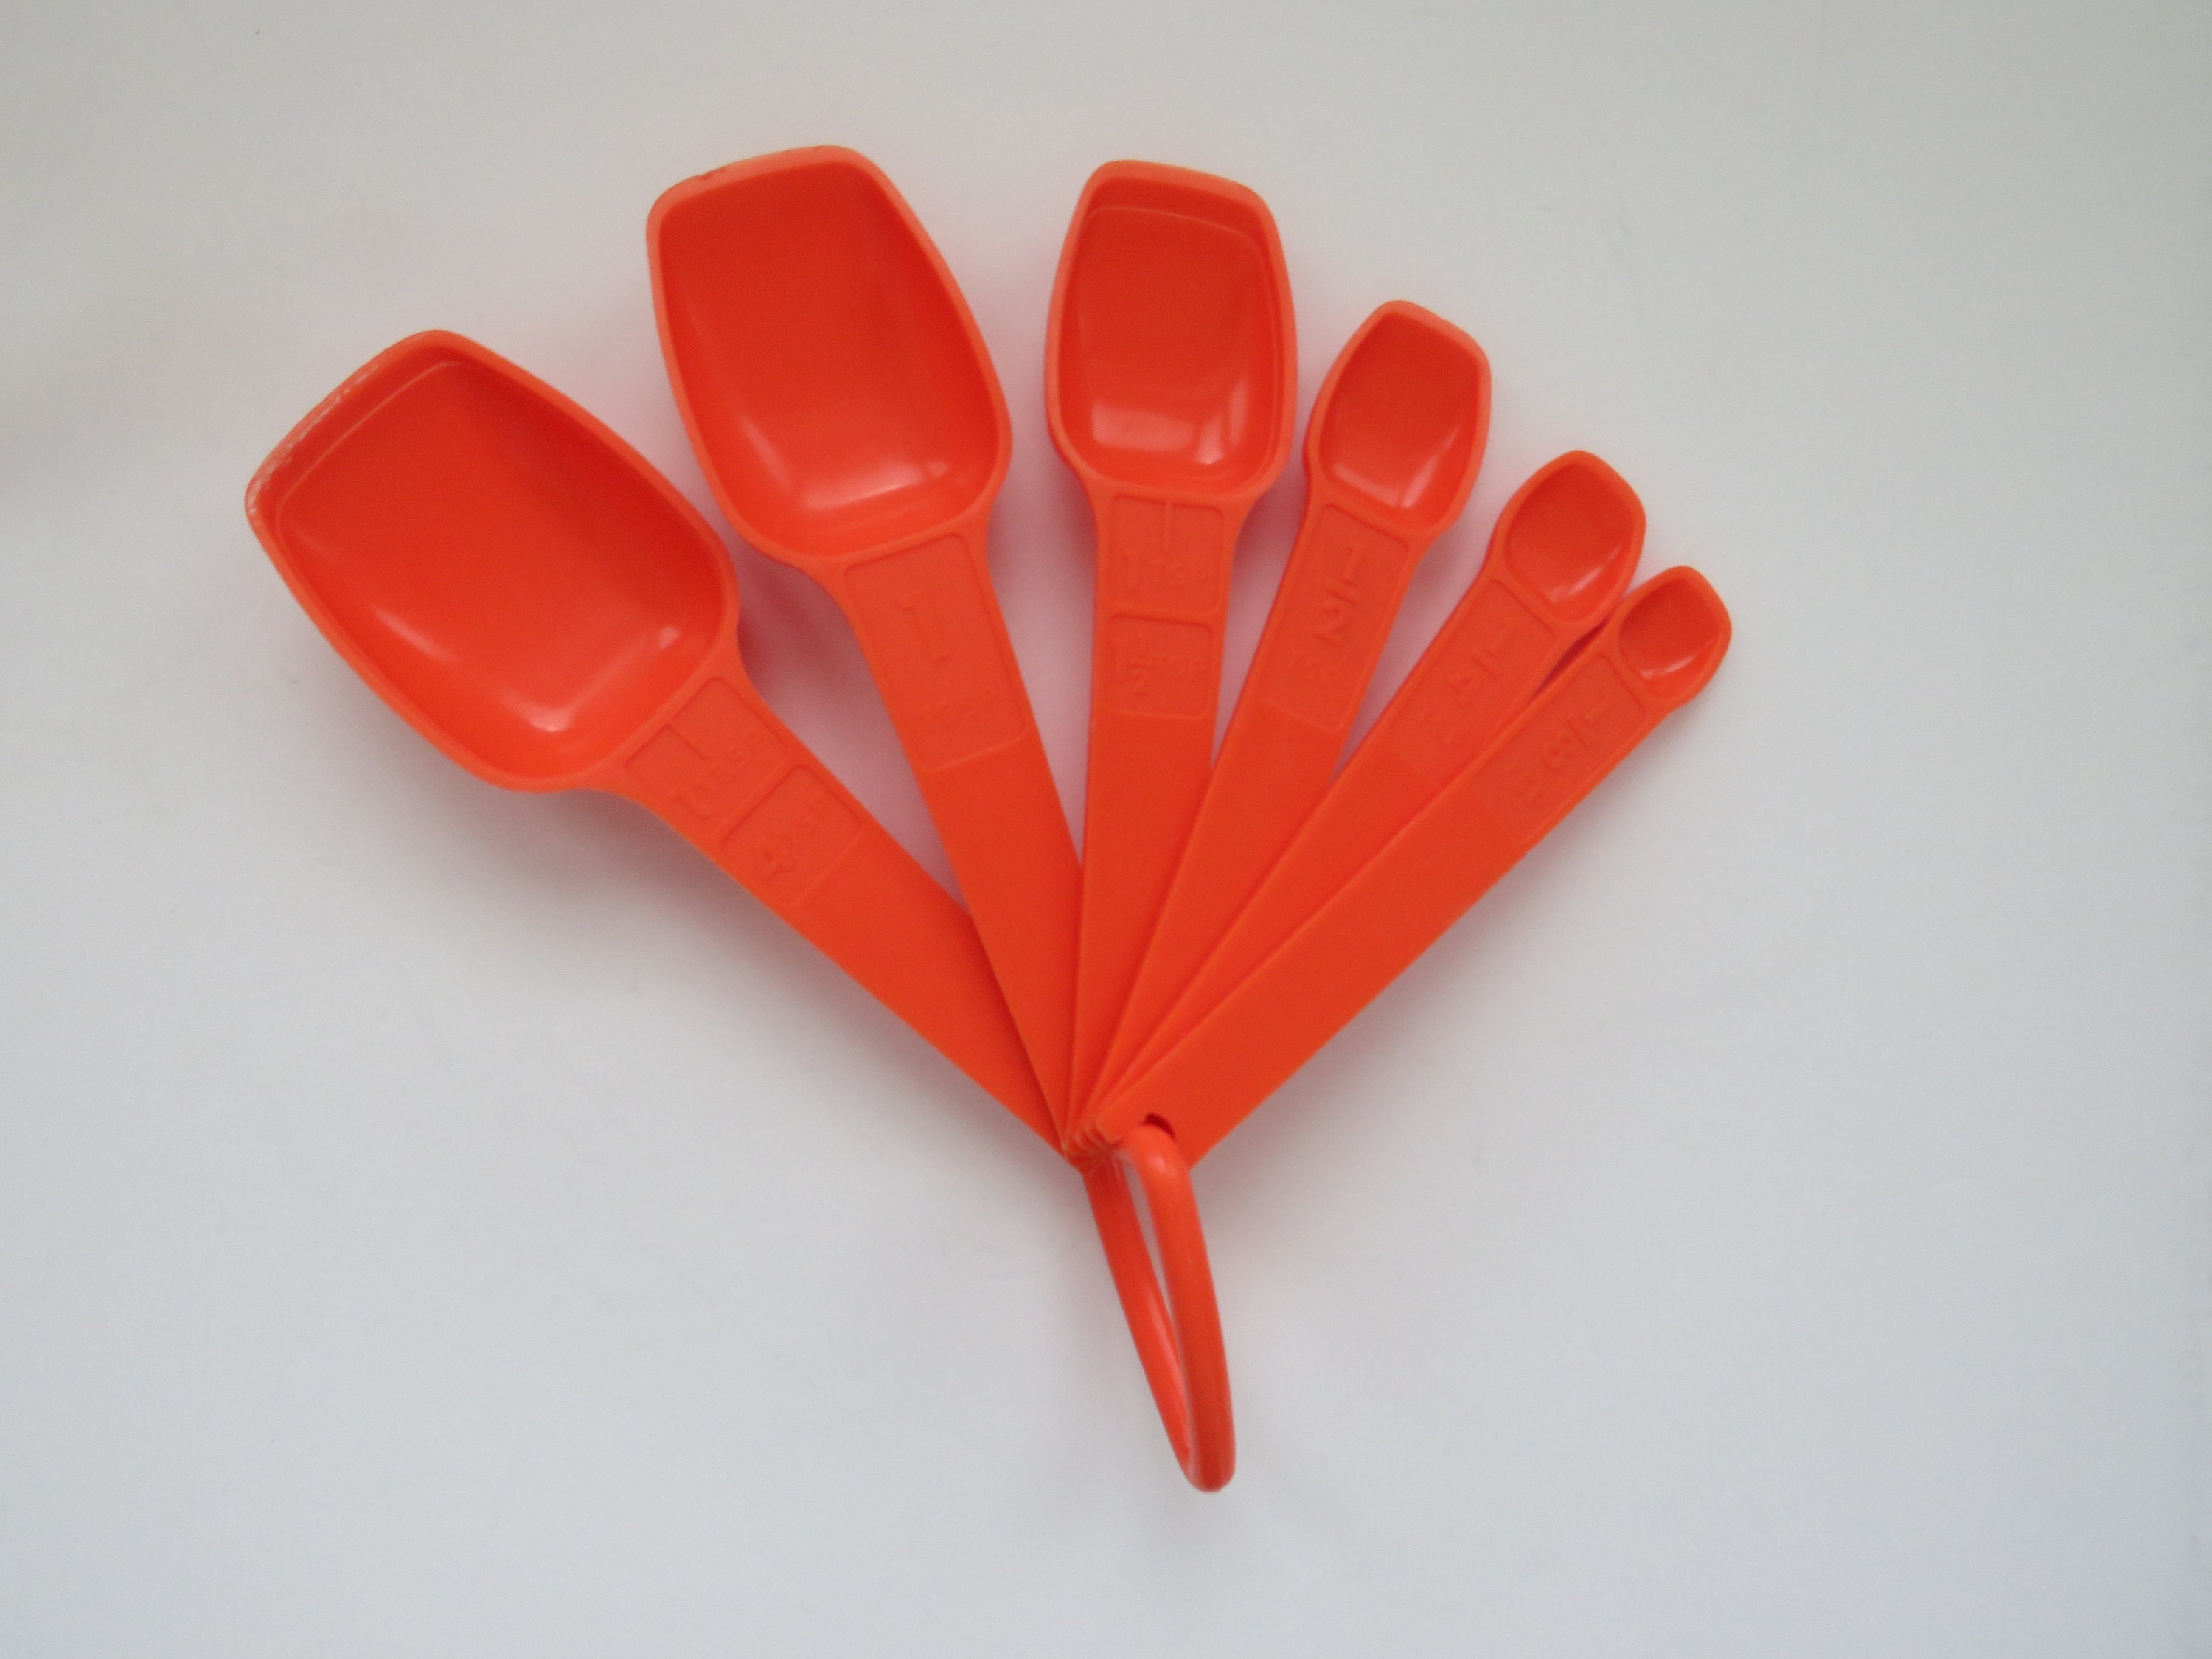 New Tupperware Measuring Spoons Set 6 Pieces Red Nesting Scoops